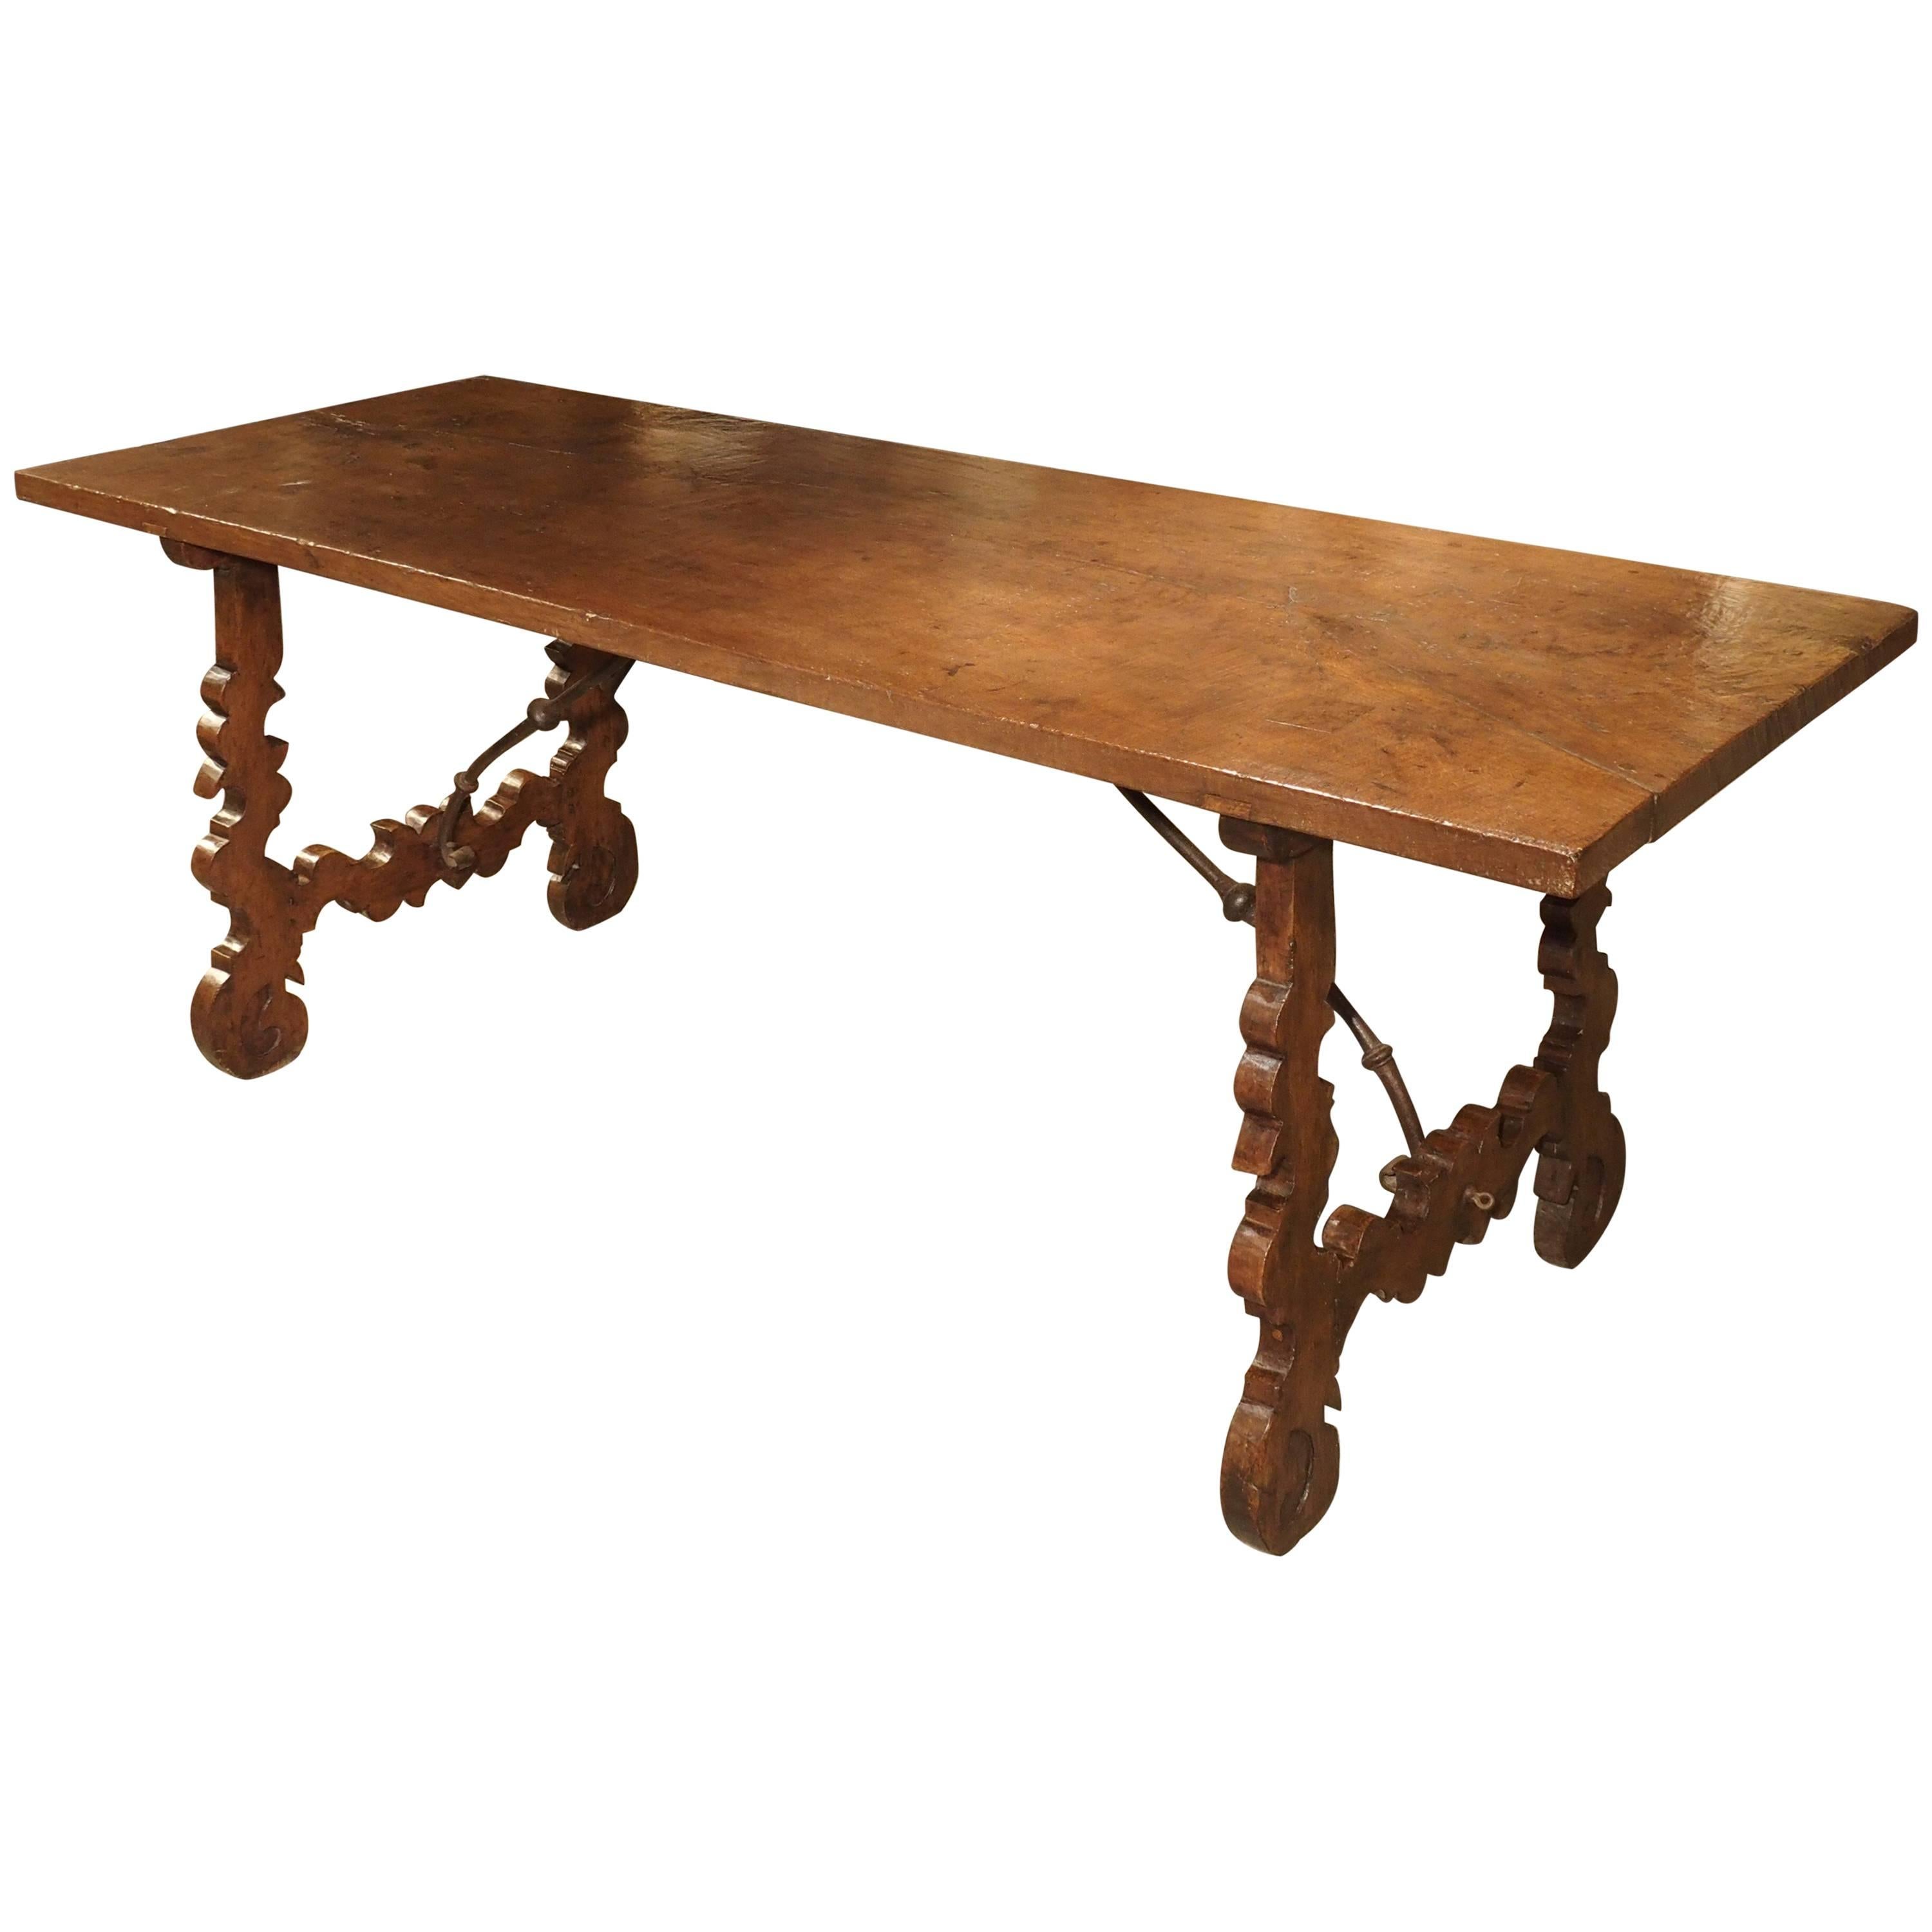 Single Plank Oak and Walnut Wood Refectory Table from Spain, 18th Century For Sale